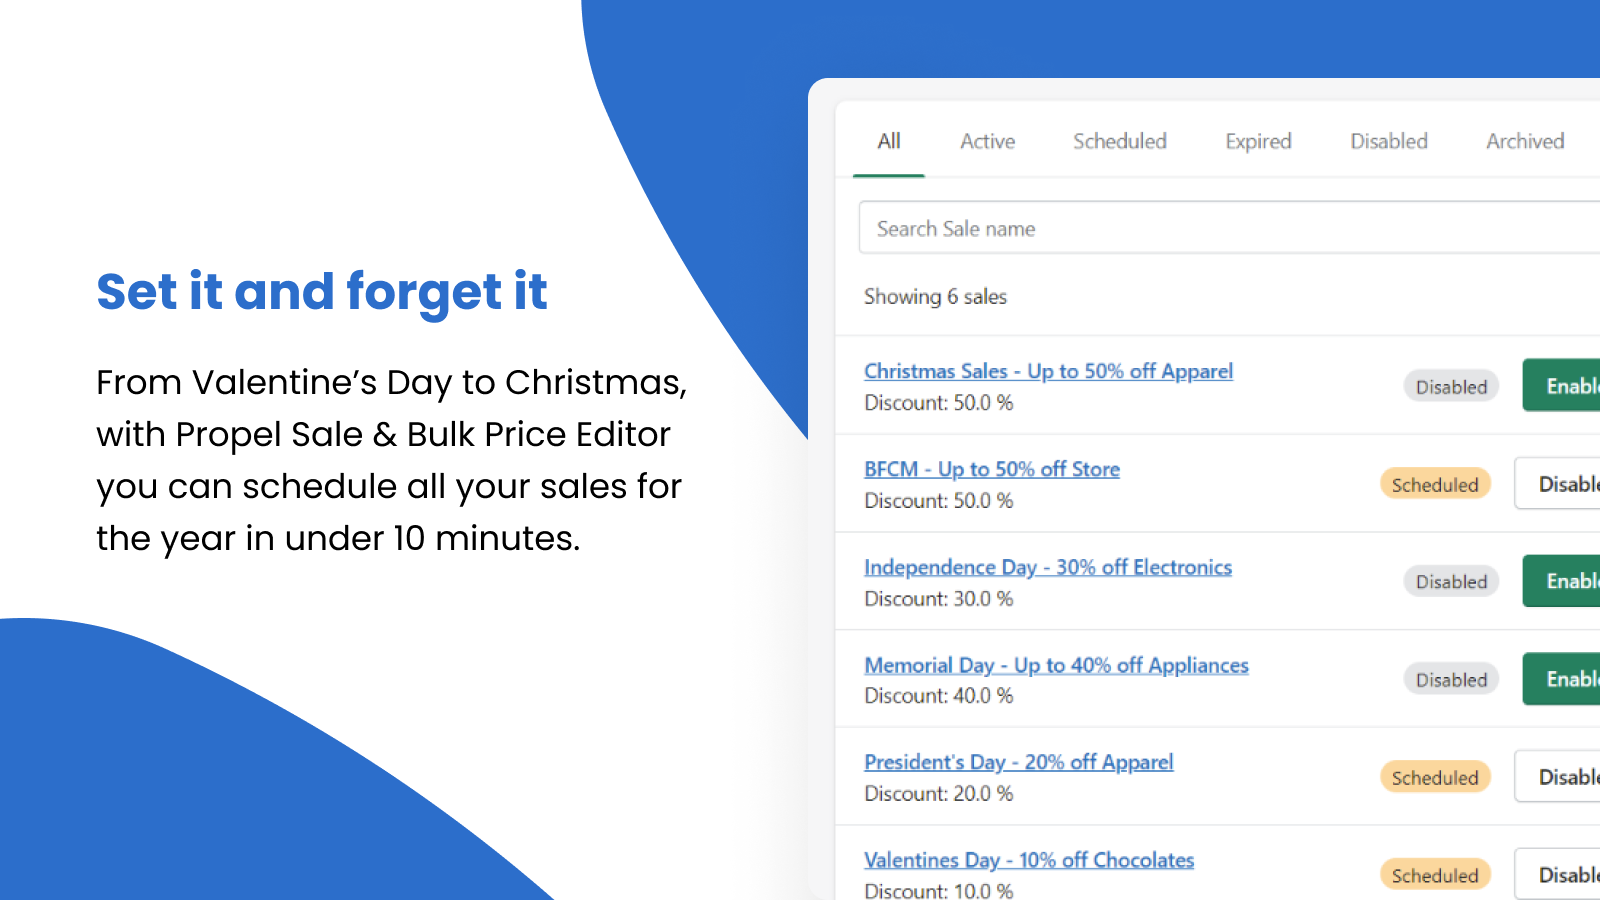 Schedule all your year's sales in under 15 minutes.